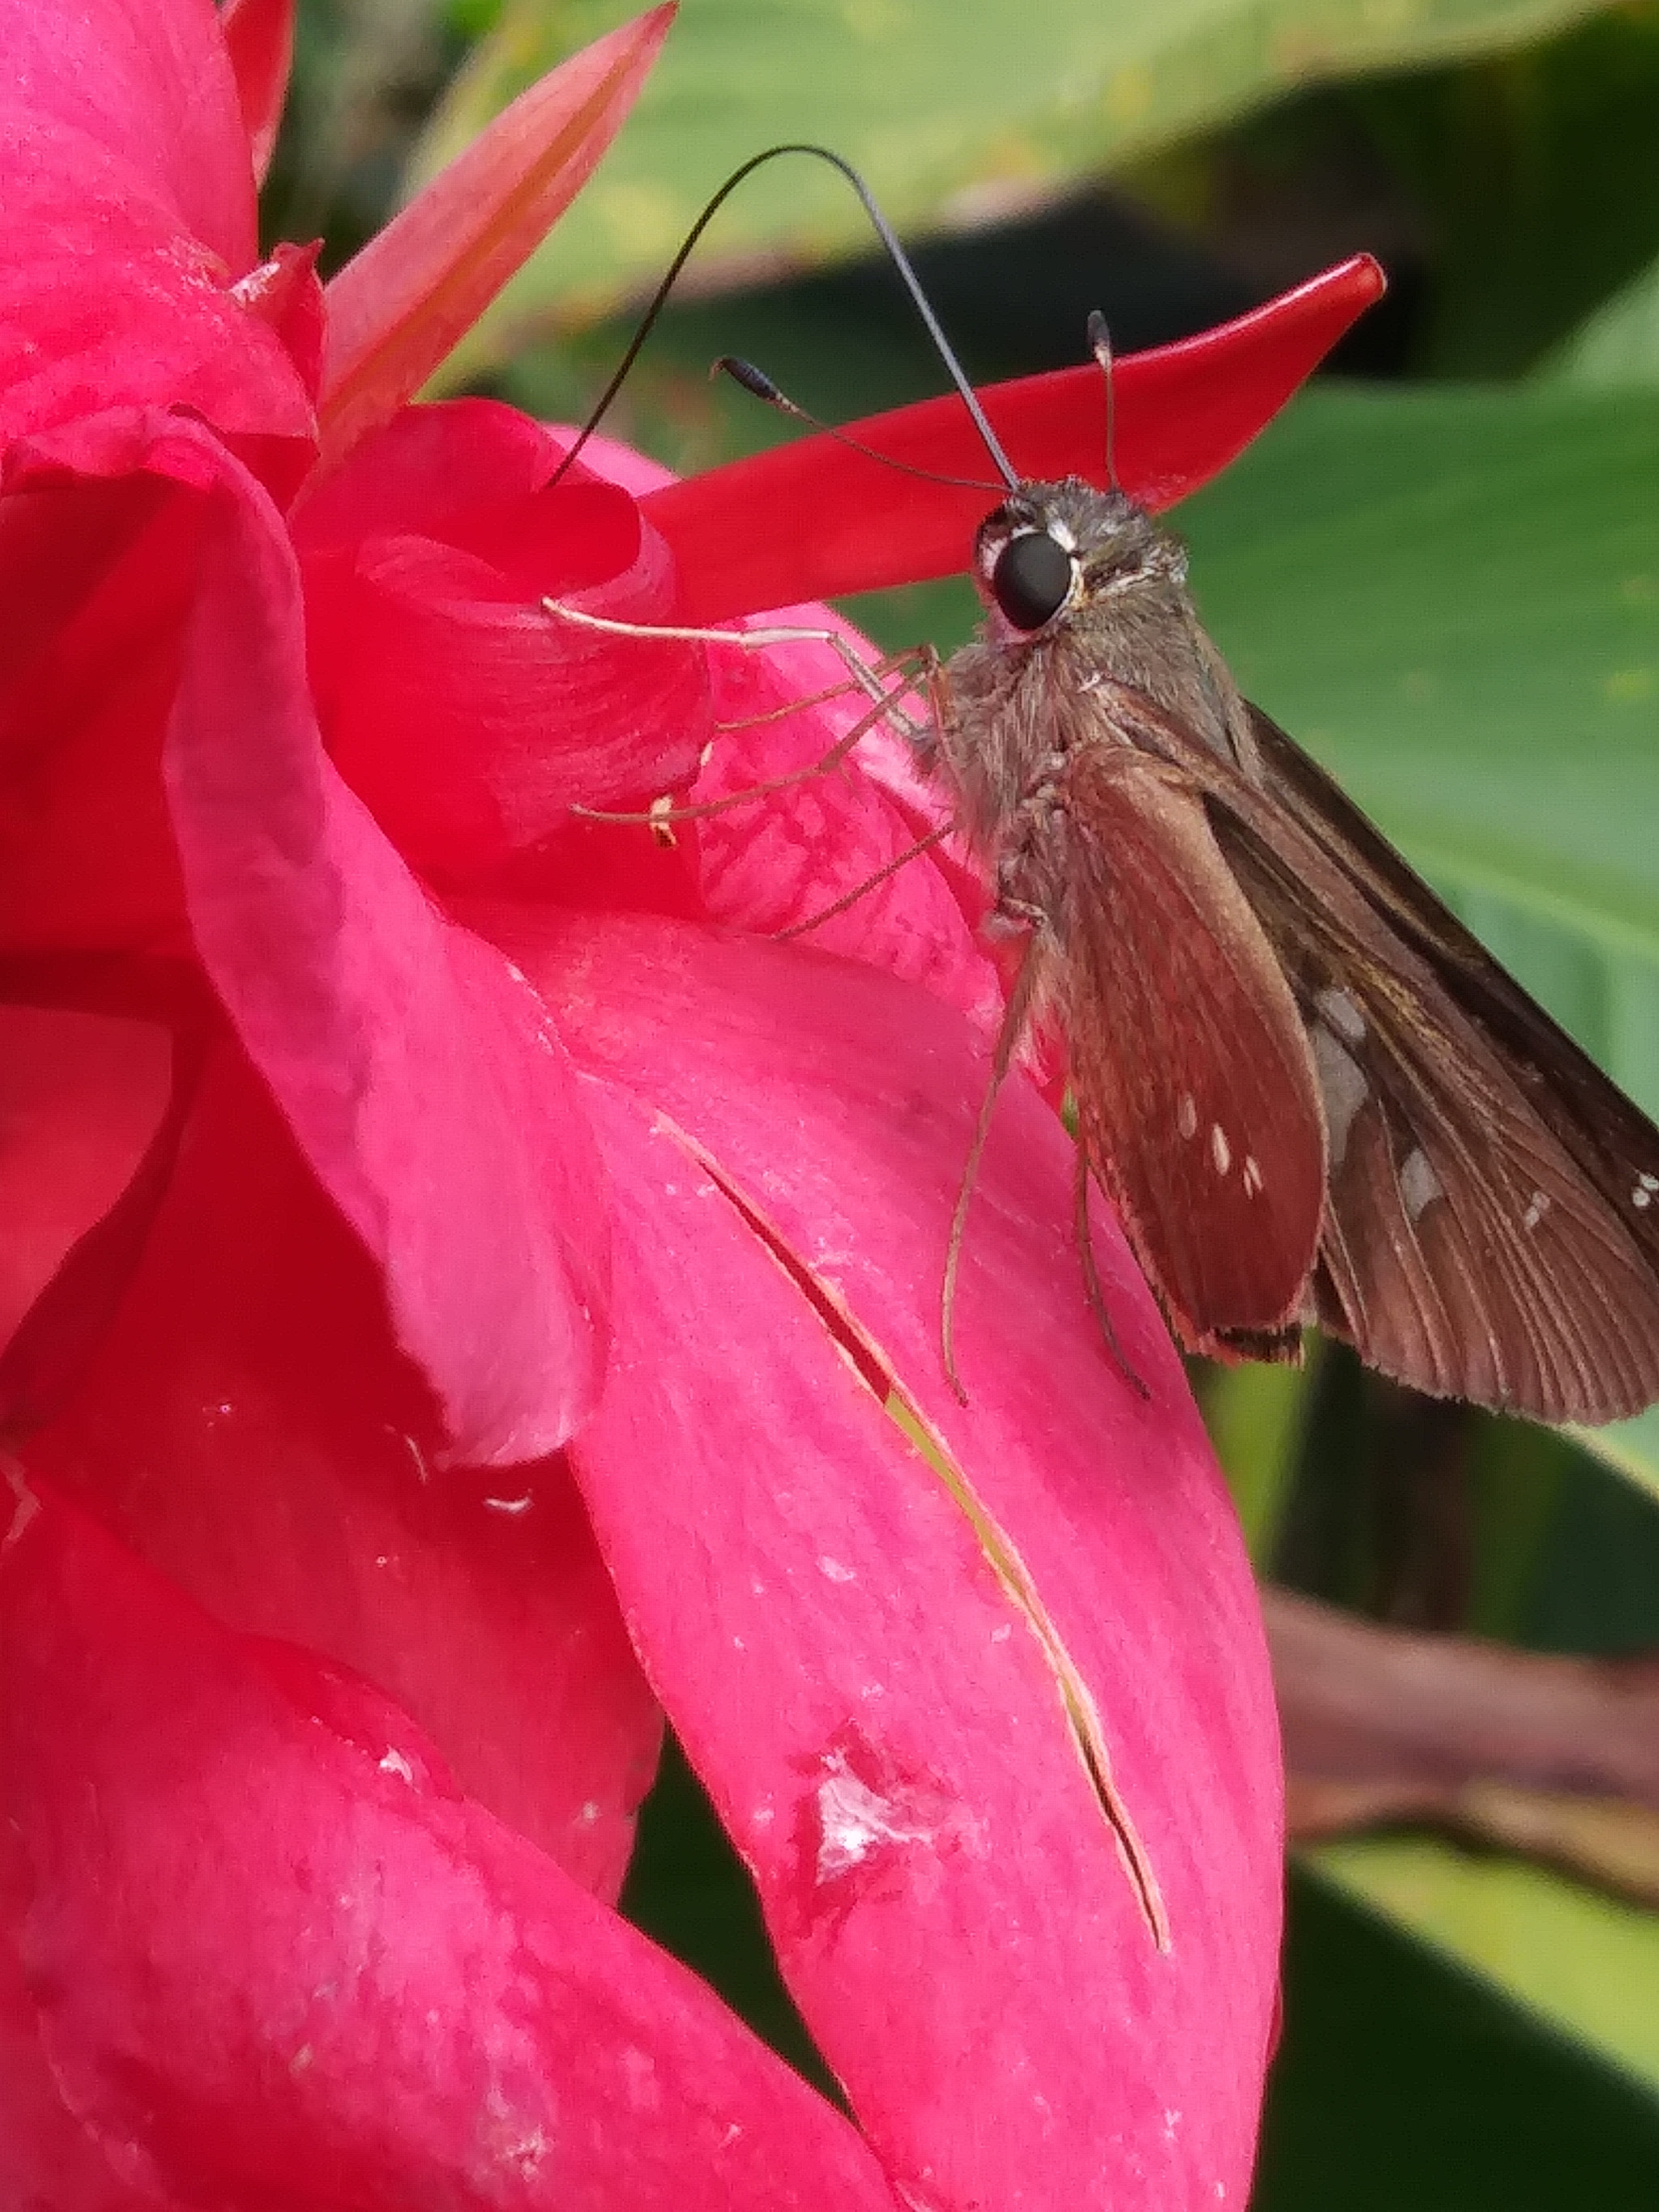 LG K20 V sample photo. The moth and the cana lily photography